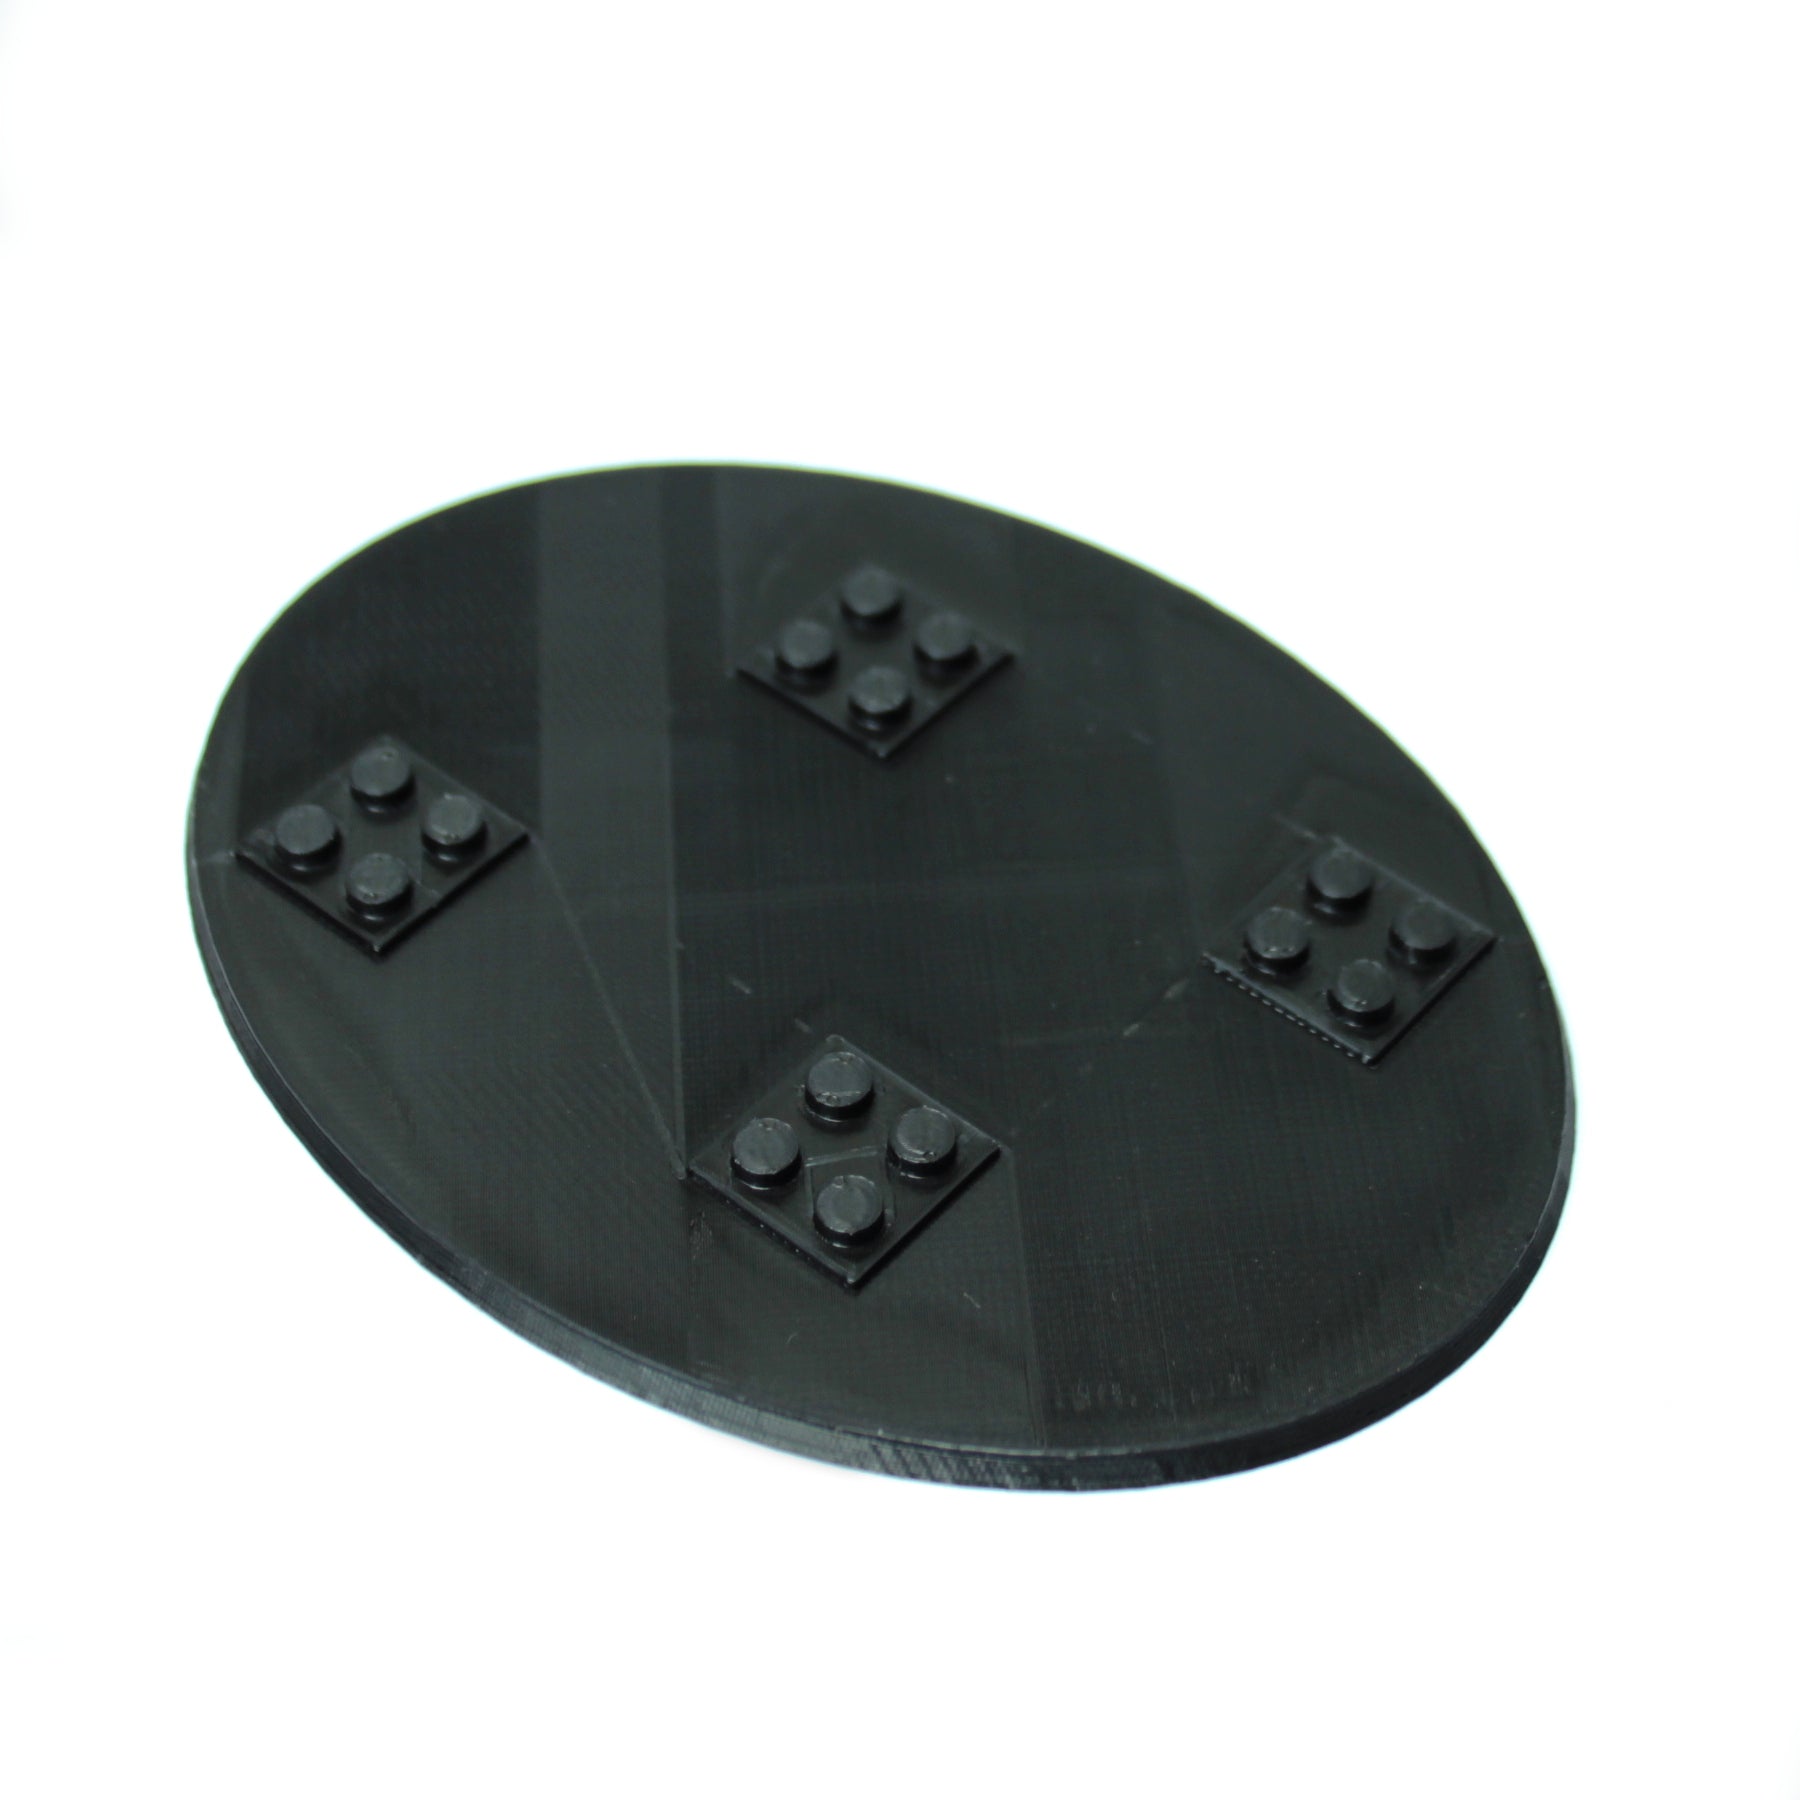 Elliptical Base for Miniature with Studs